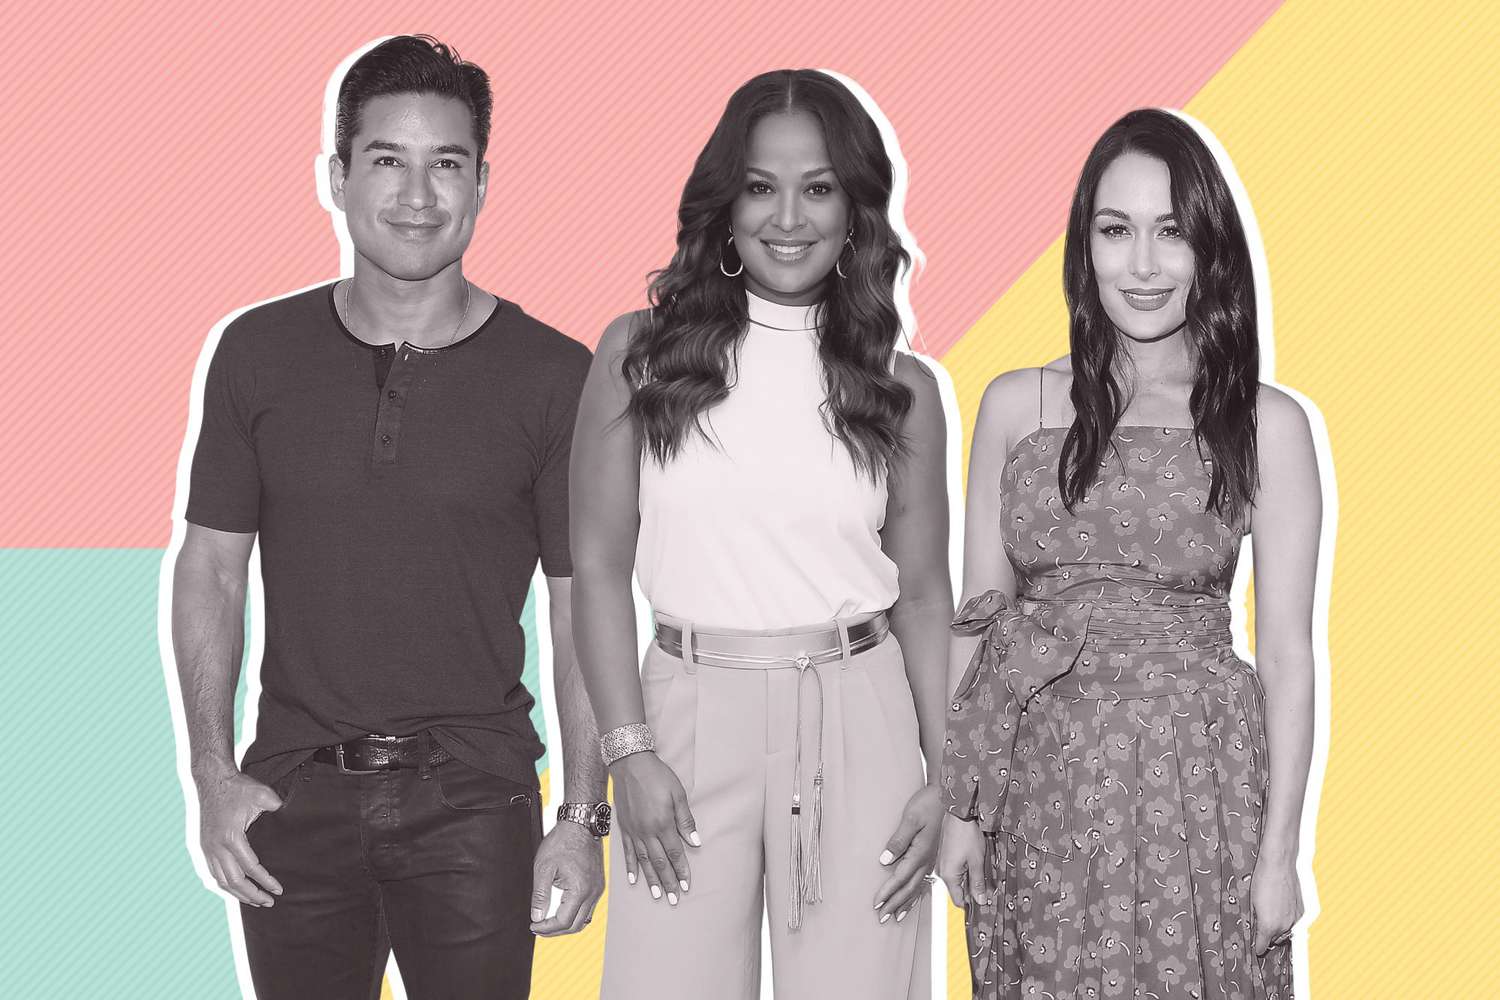 Mario Lopez, Laila Ali, and Brie Bella on Color Patterned Background